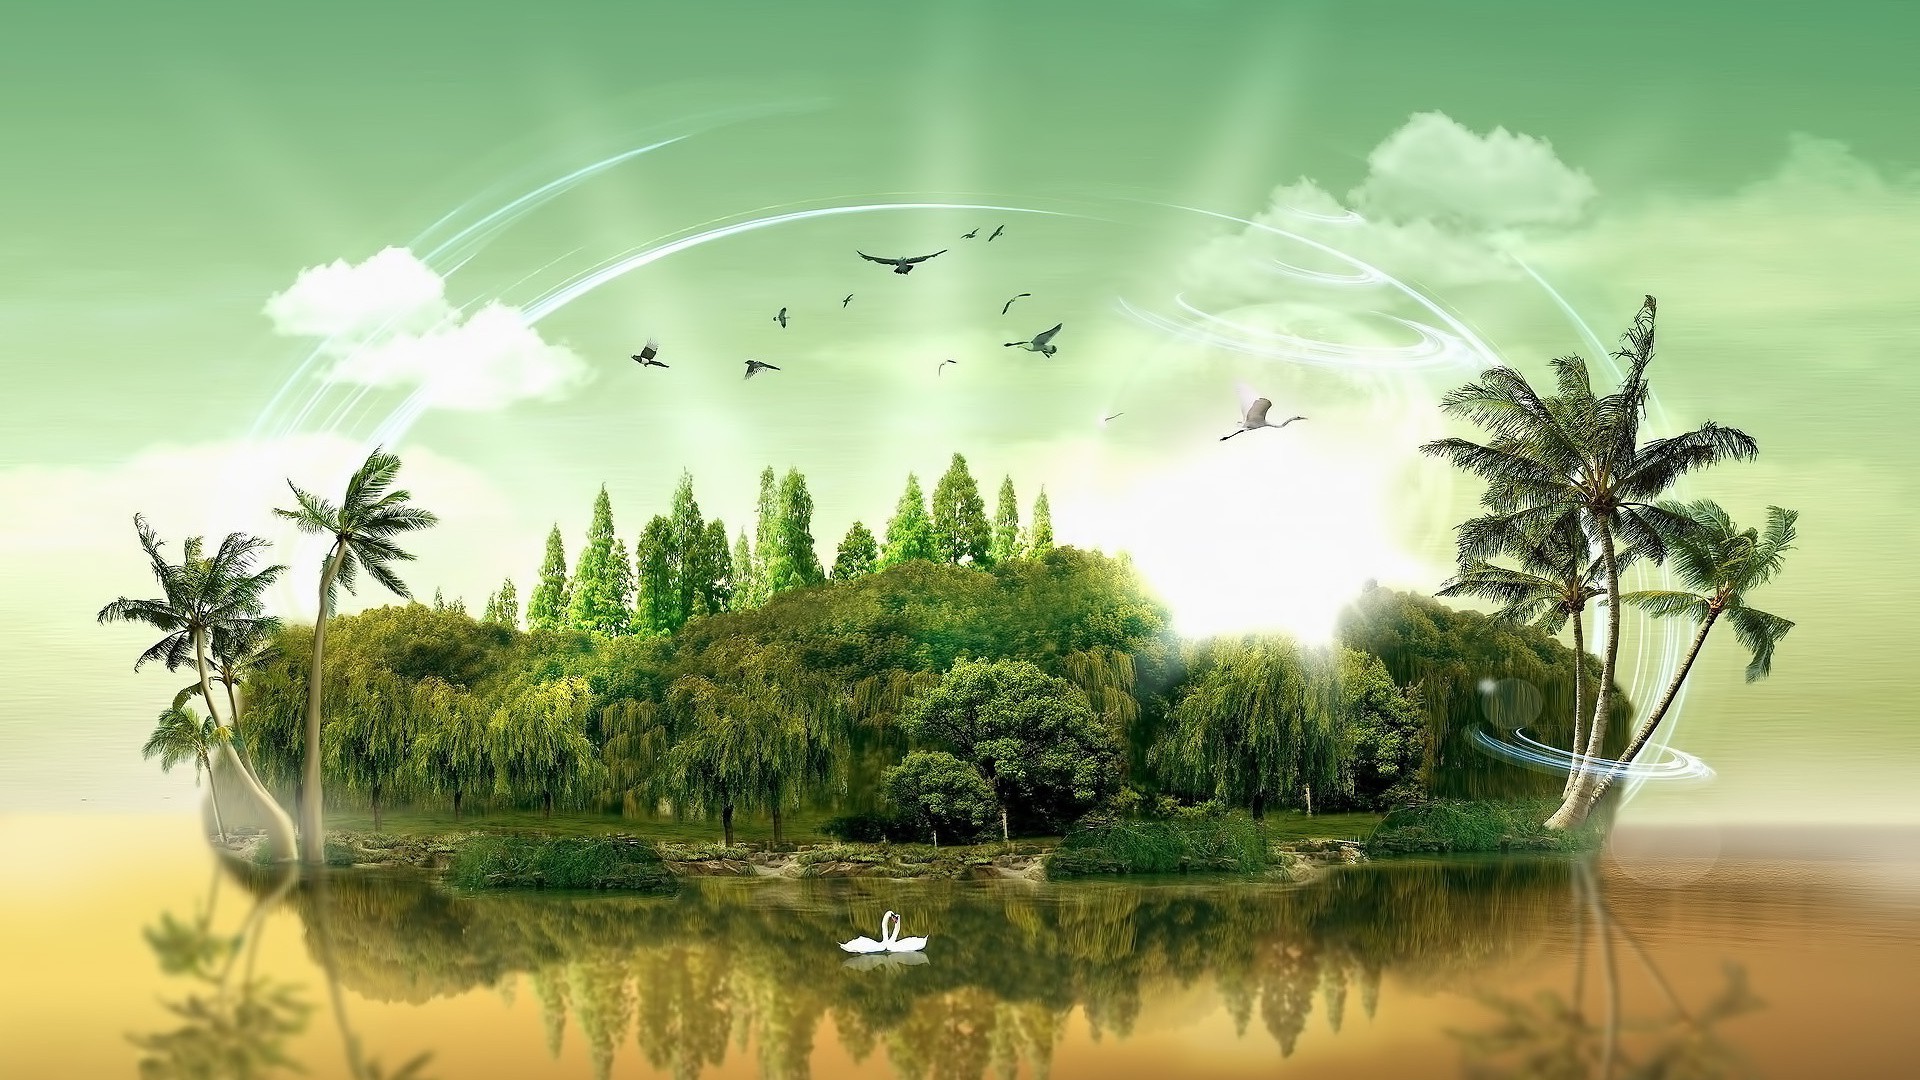 Trees And Grass Digital Art Wallpapers